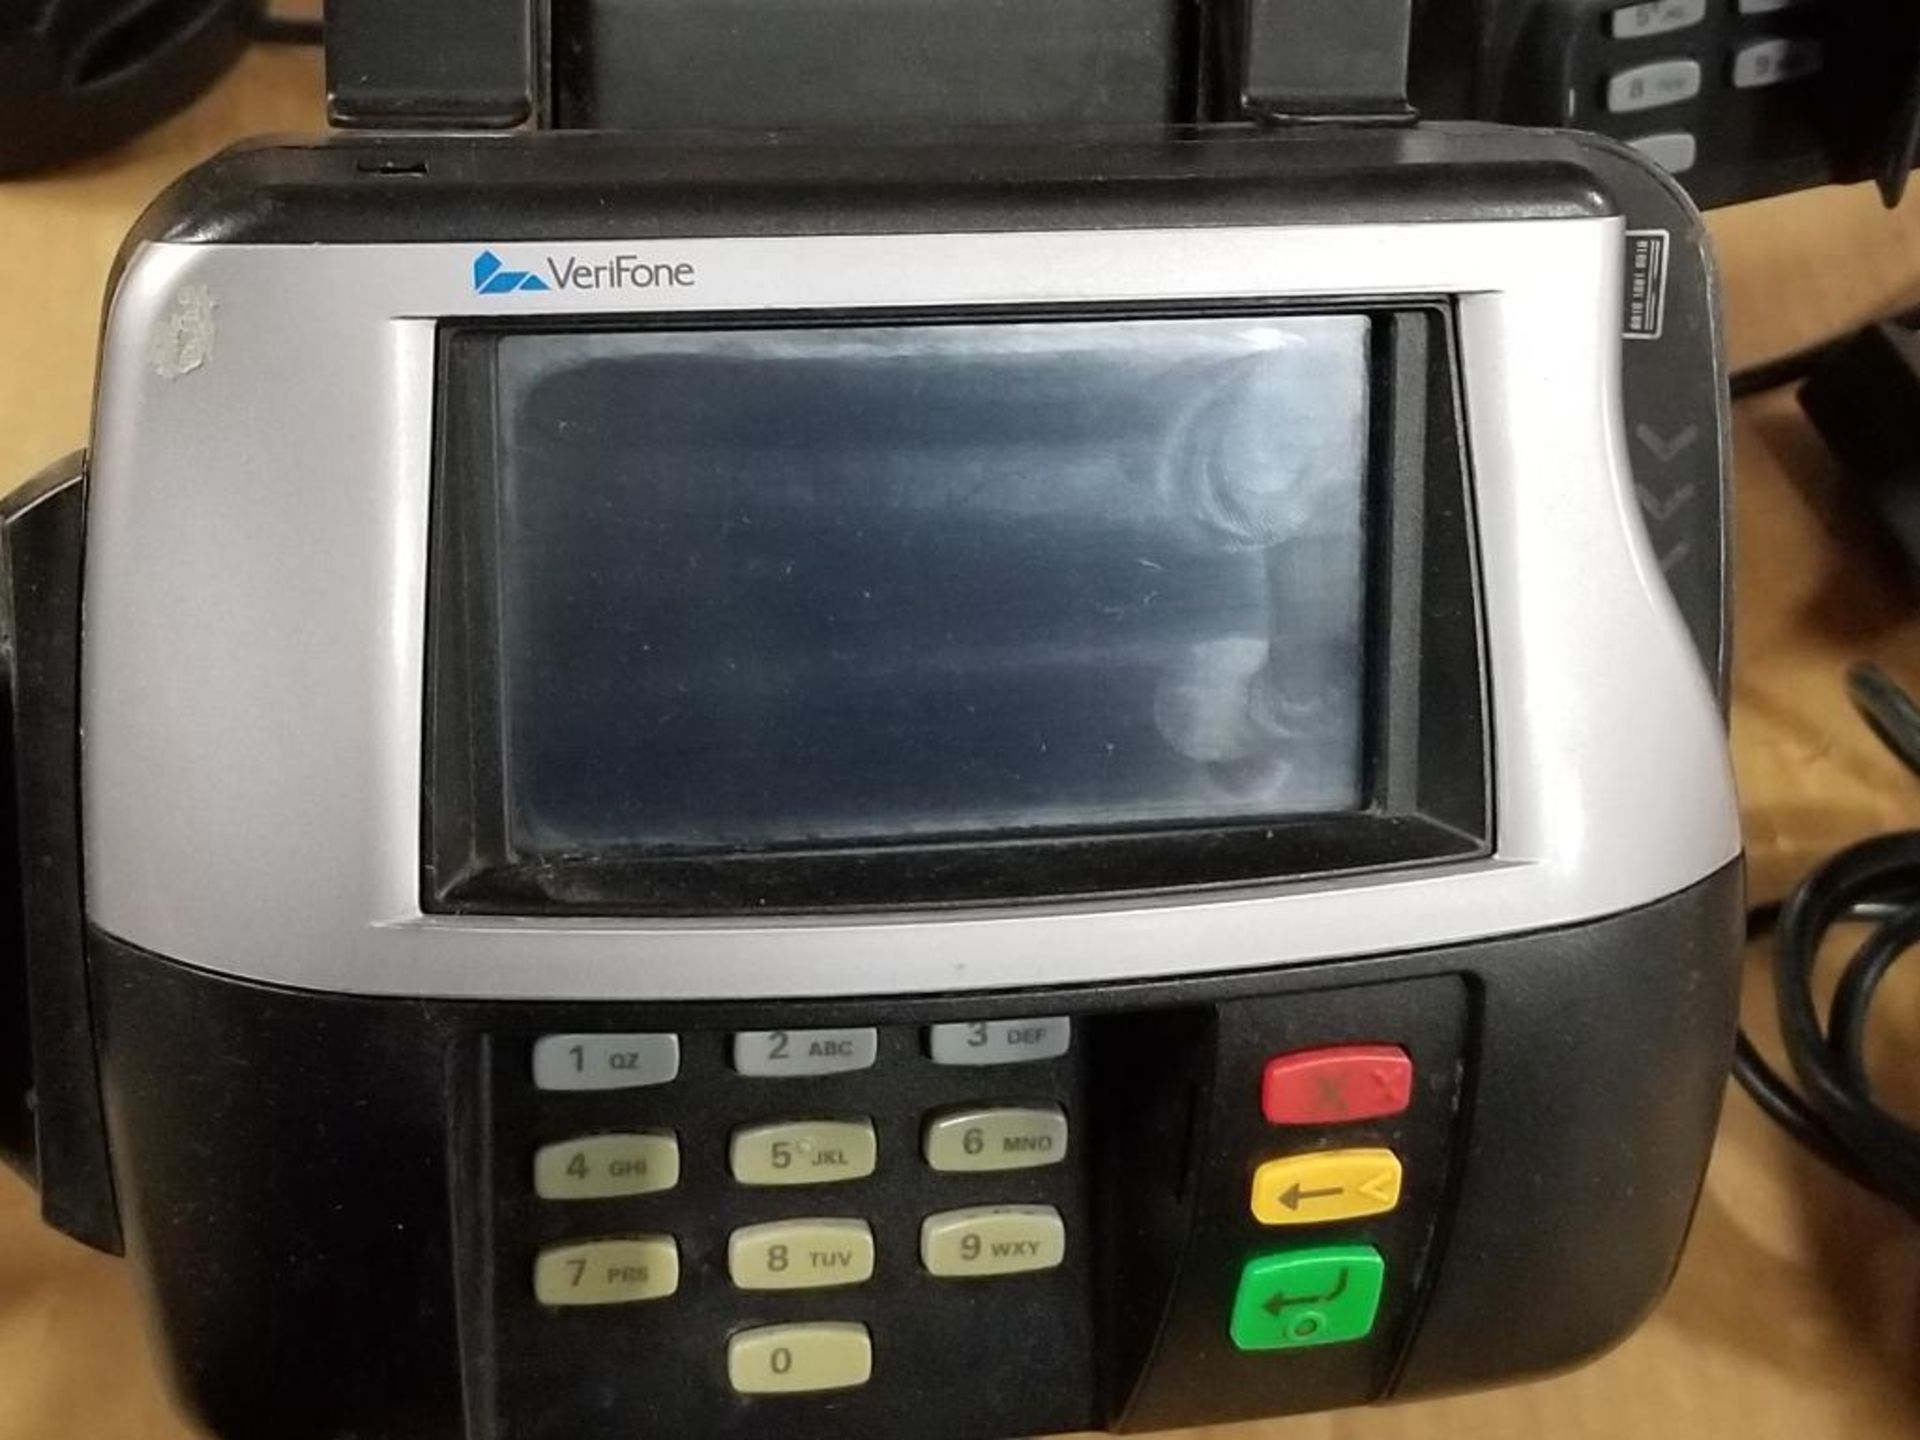 Qty 5 - Verifone MX860 credit card terminal. - Image 3 of 6